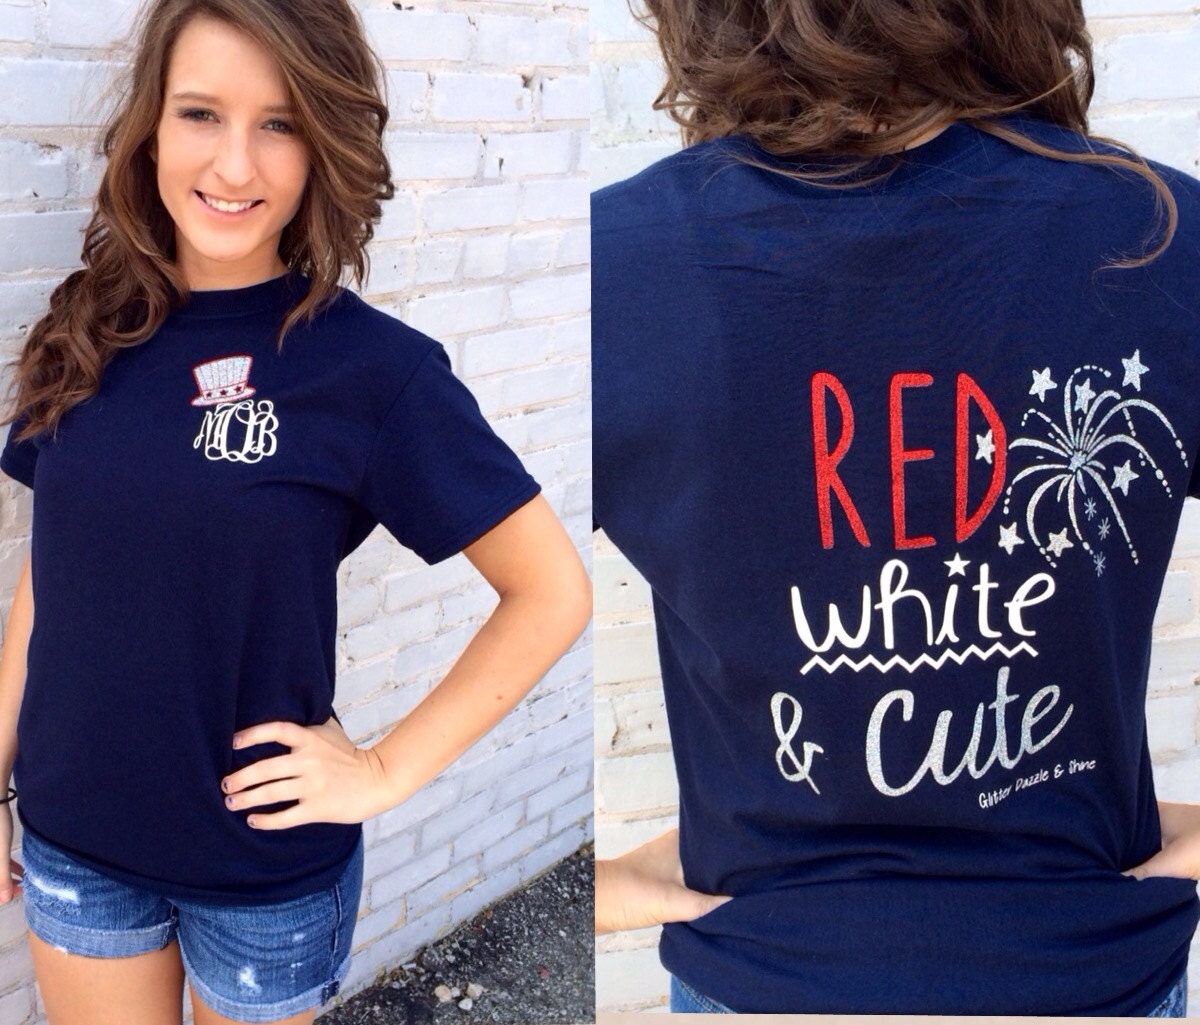 Red White & Cute Glitter T-ShirtLast day to order June